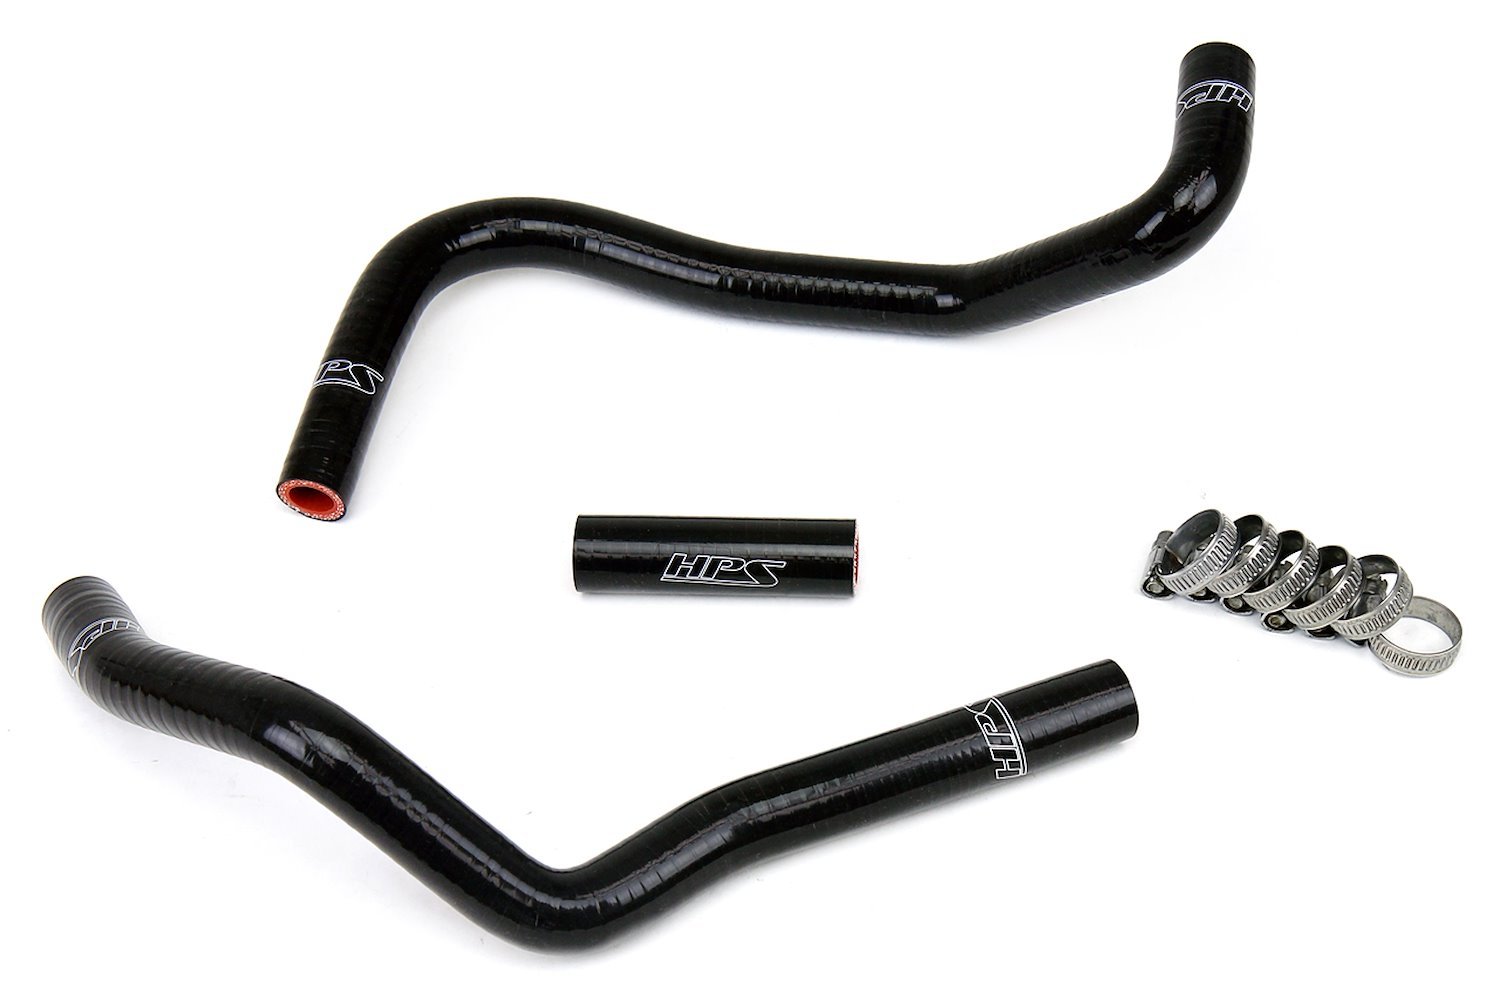 57-1282-BLK Heater Hose Kit, High-Temp 3-Ply Reinforced Silicone, Replace OEM Rubber Heater Coolant Hoses